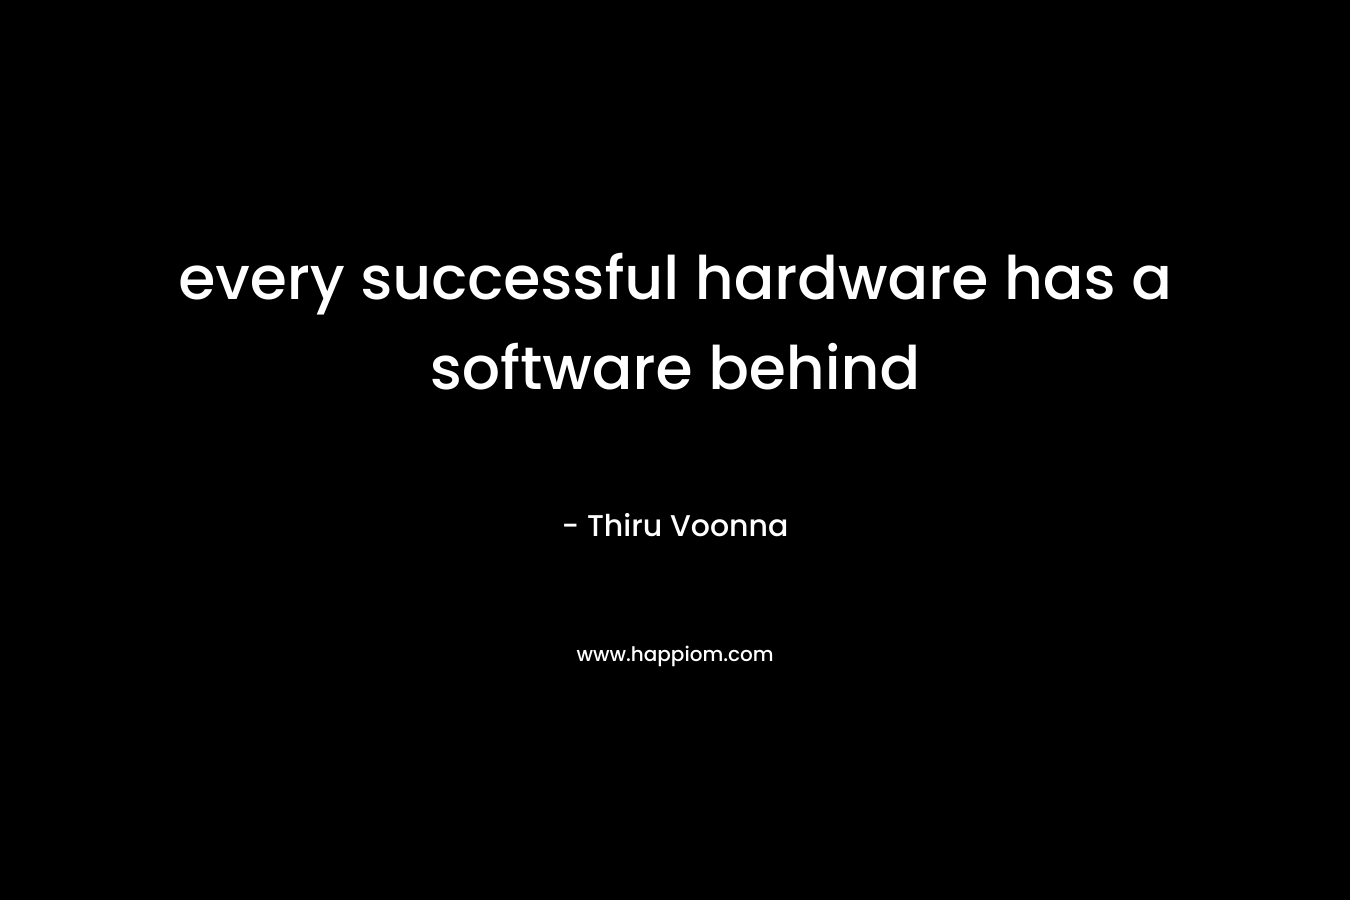 every successful hardware has a software behind